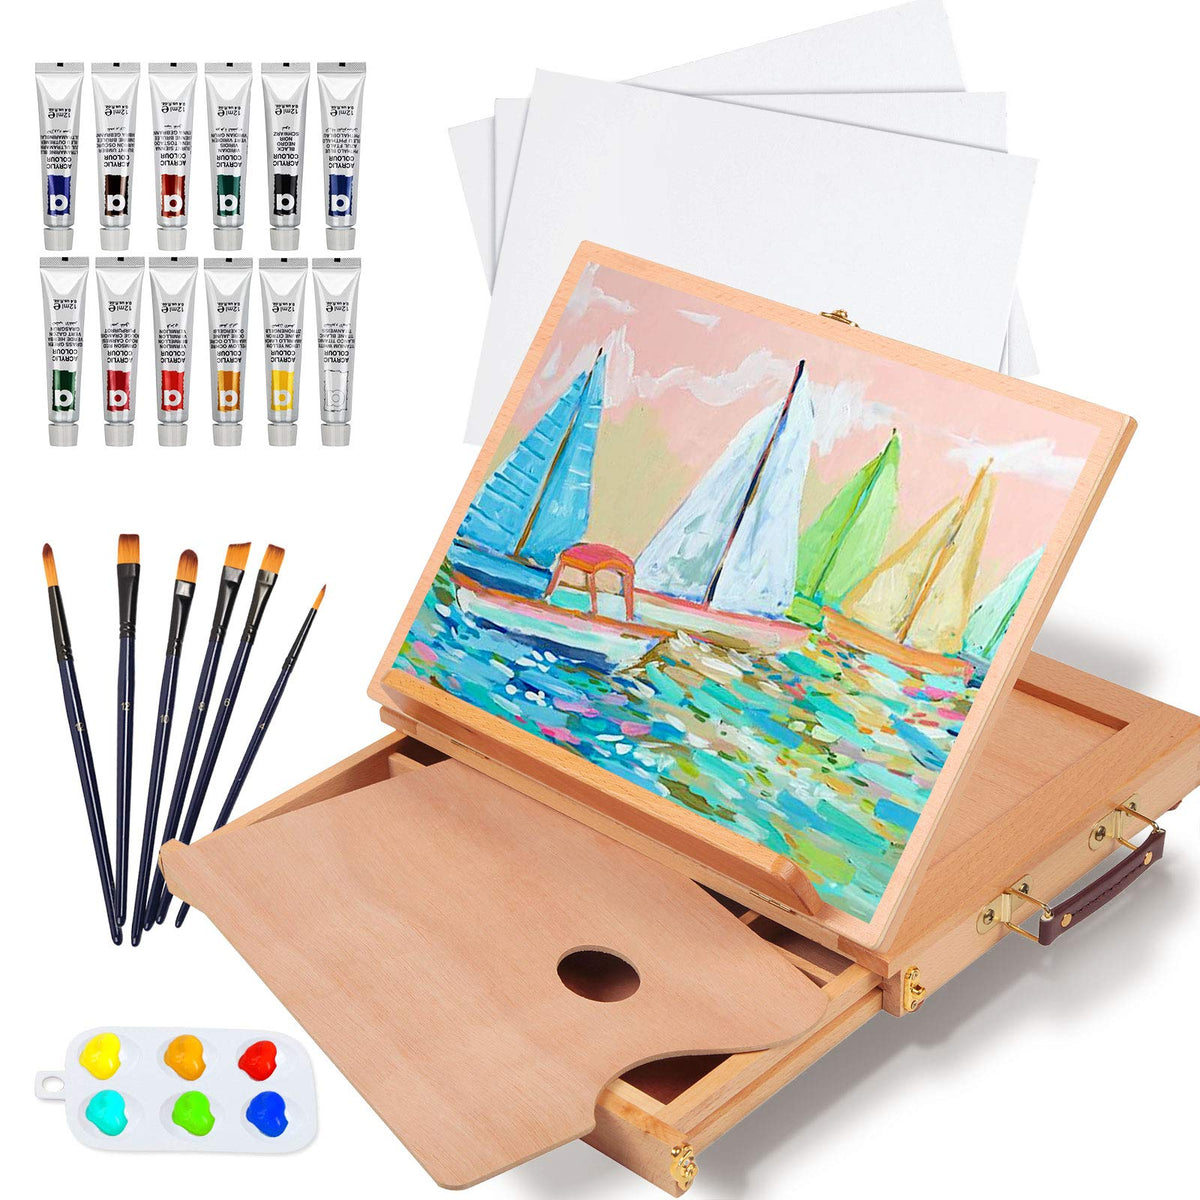 Art Supplies, 240-Piece Drawing Art kit, Gifts Art Set Case with Double  Sided Trifold Easel, Includes Oil Pastels, Crayons, Colored Pencils,  Watercolor Cakes, Sketch Pad (PINK) 